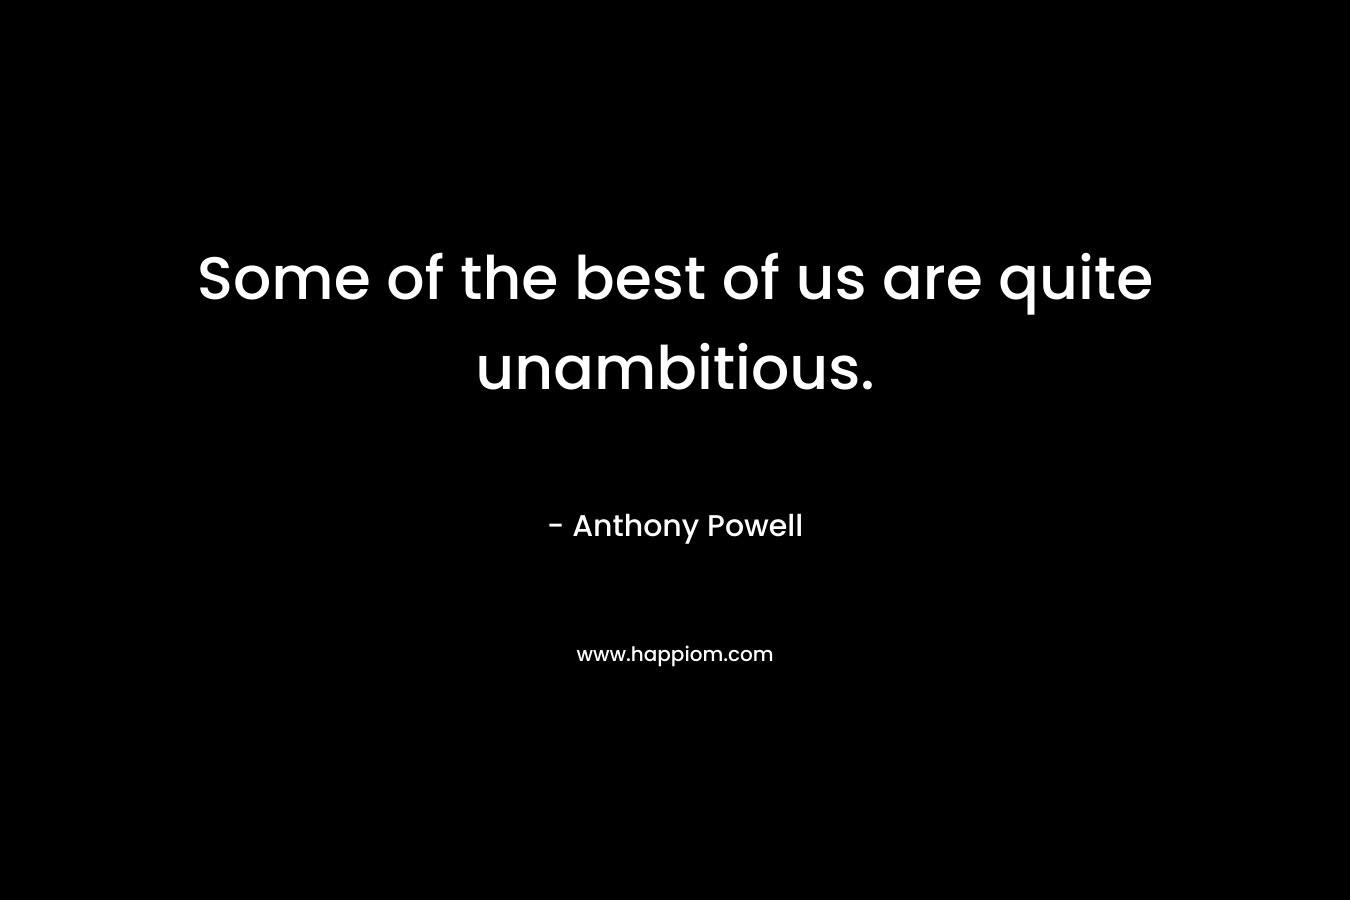 Some of the best of us are quite unambitious. – Anthony Powell